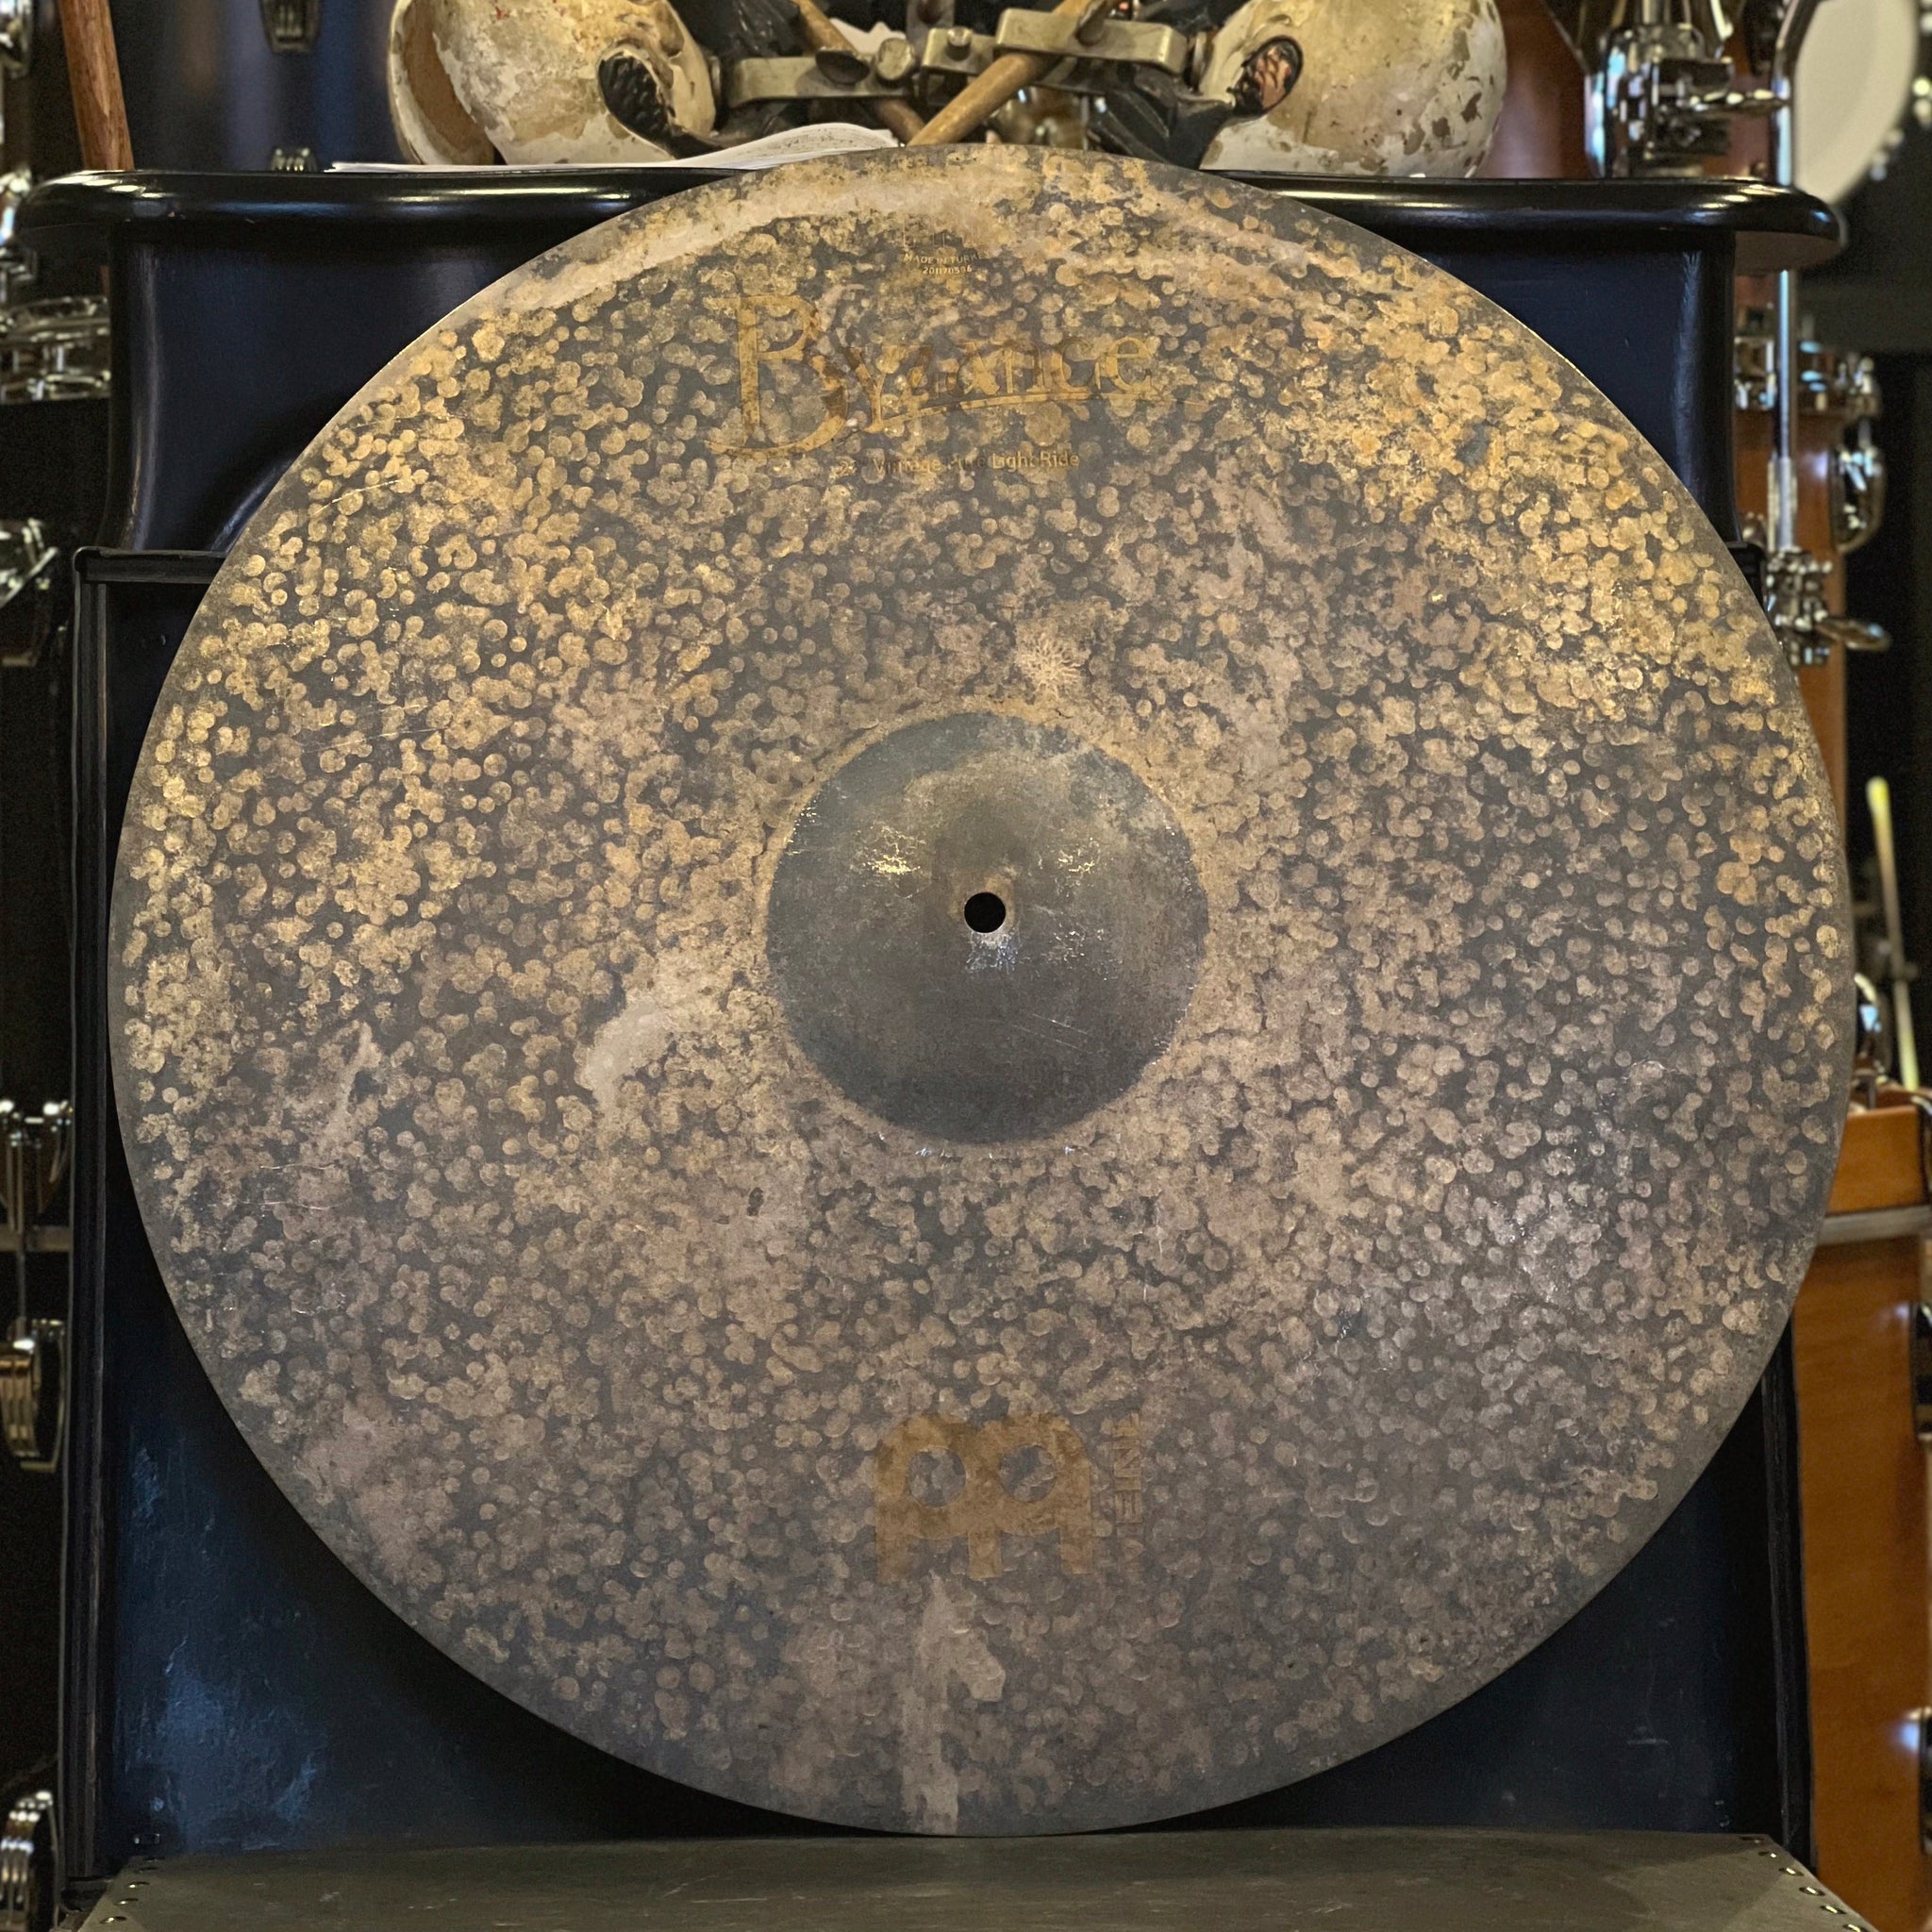 NEW Meinl 22" Byzance Vintage Pure Light Ride Cymbal - 2475g